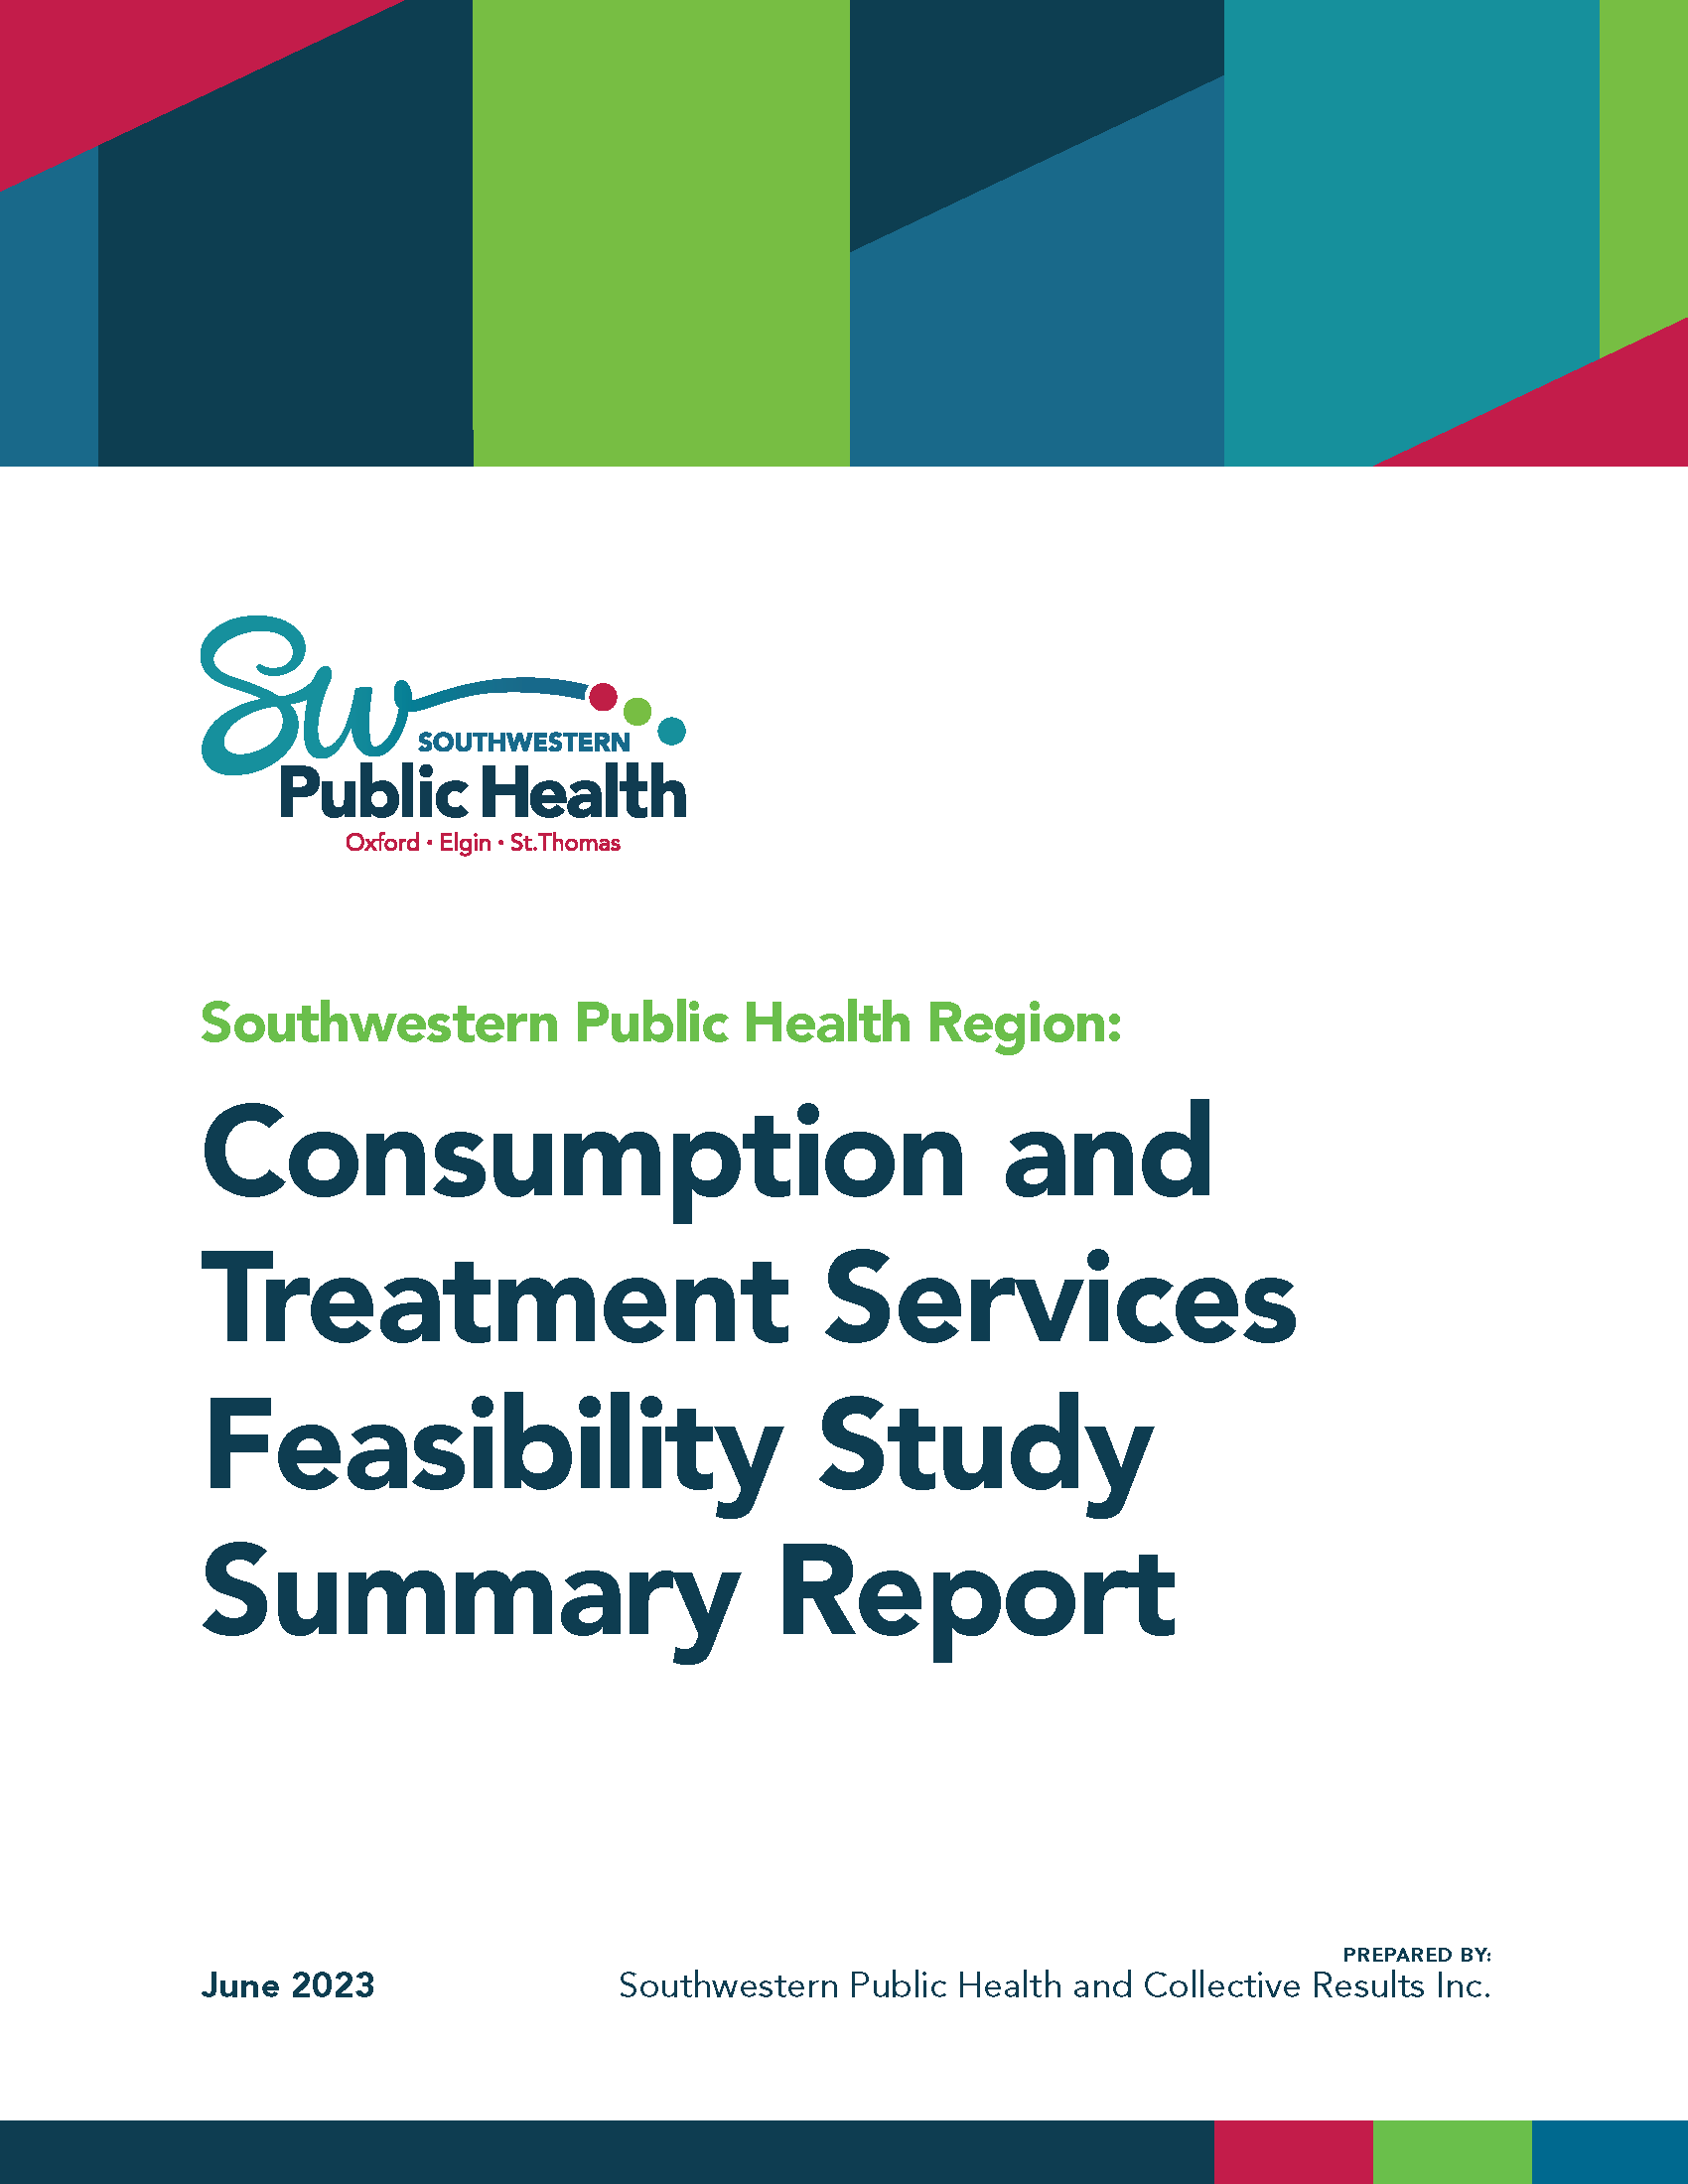 Image of the front cover of the summary report